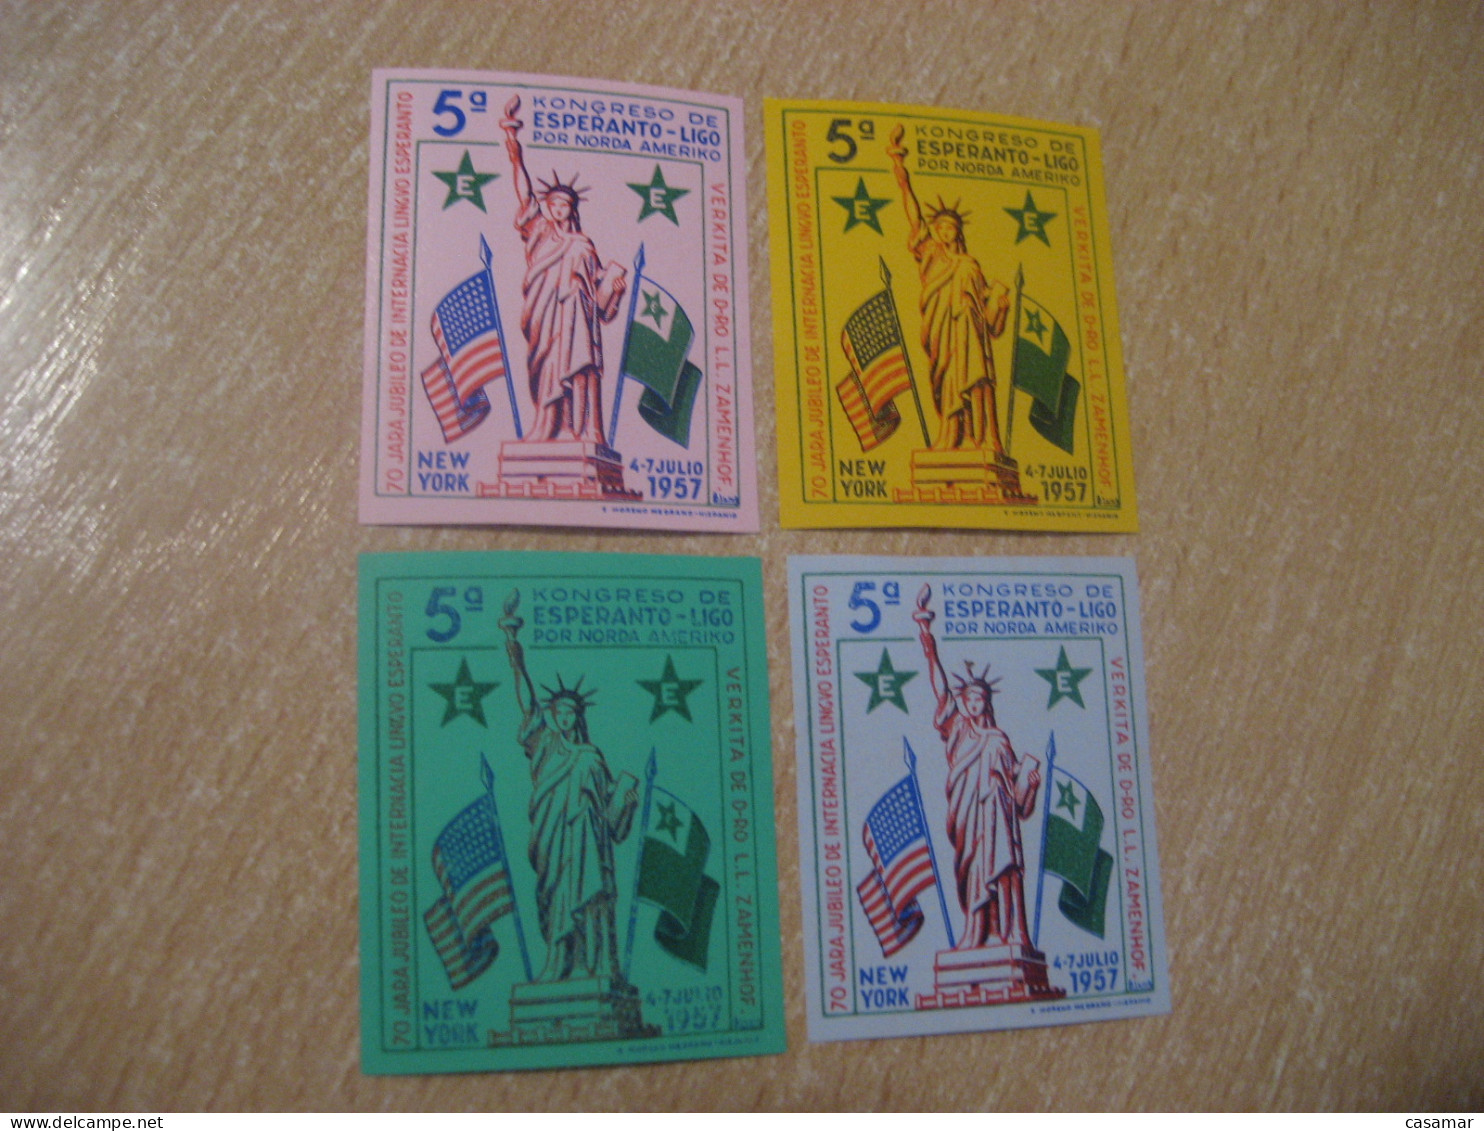 NEW YORK 1957 Esperanto Liberty Statue Flag Zamenhof Architecture Imperforated 4 Poster Stamp Vignette USA Flags Label - Monuments